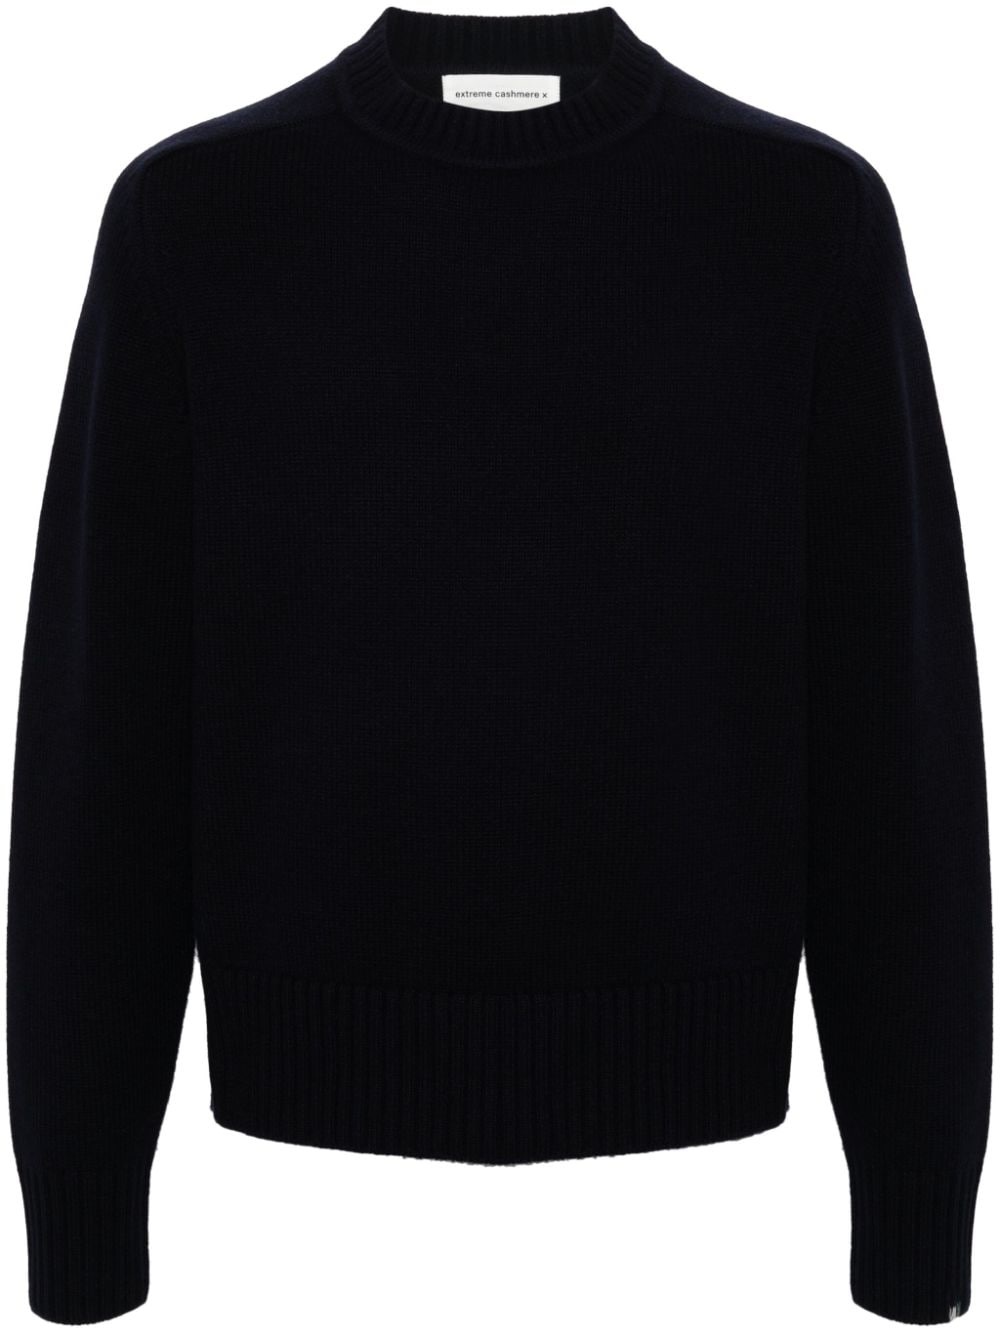 Bourgeois cashmere jumper - 1